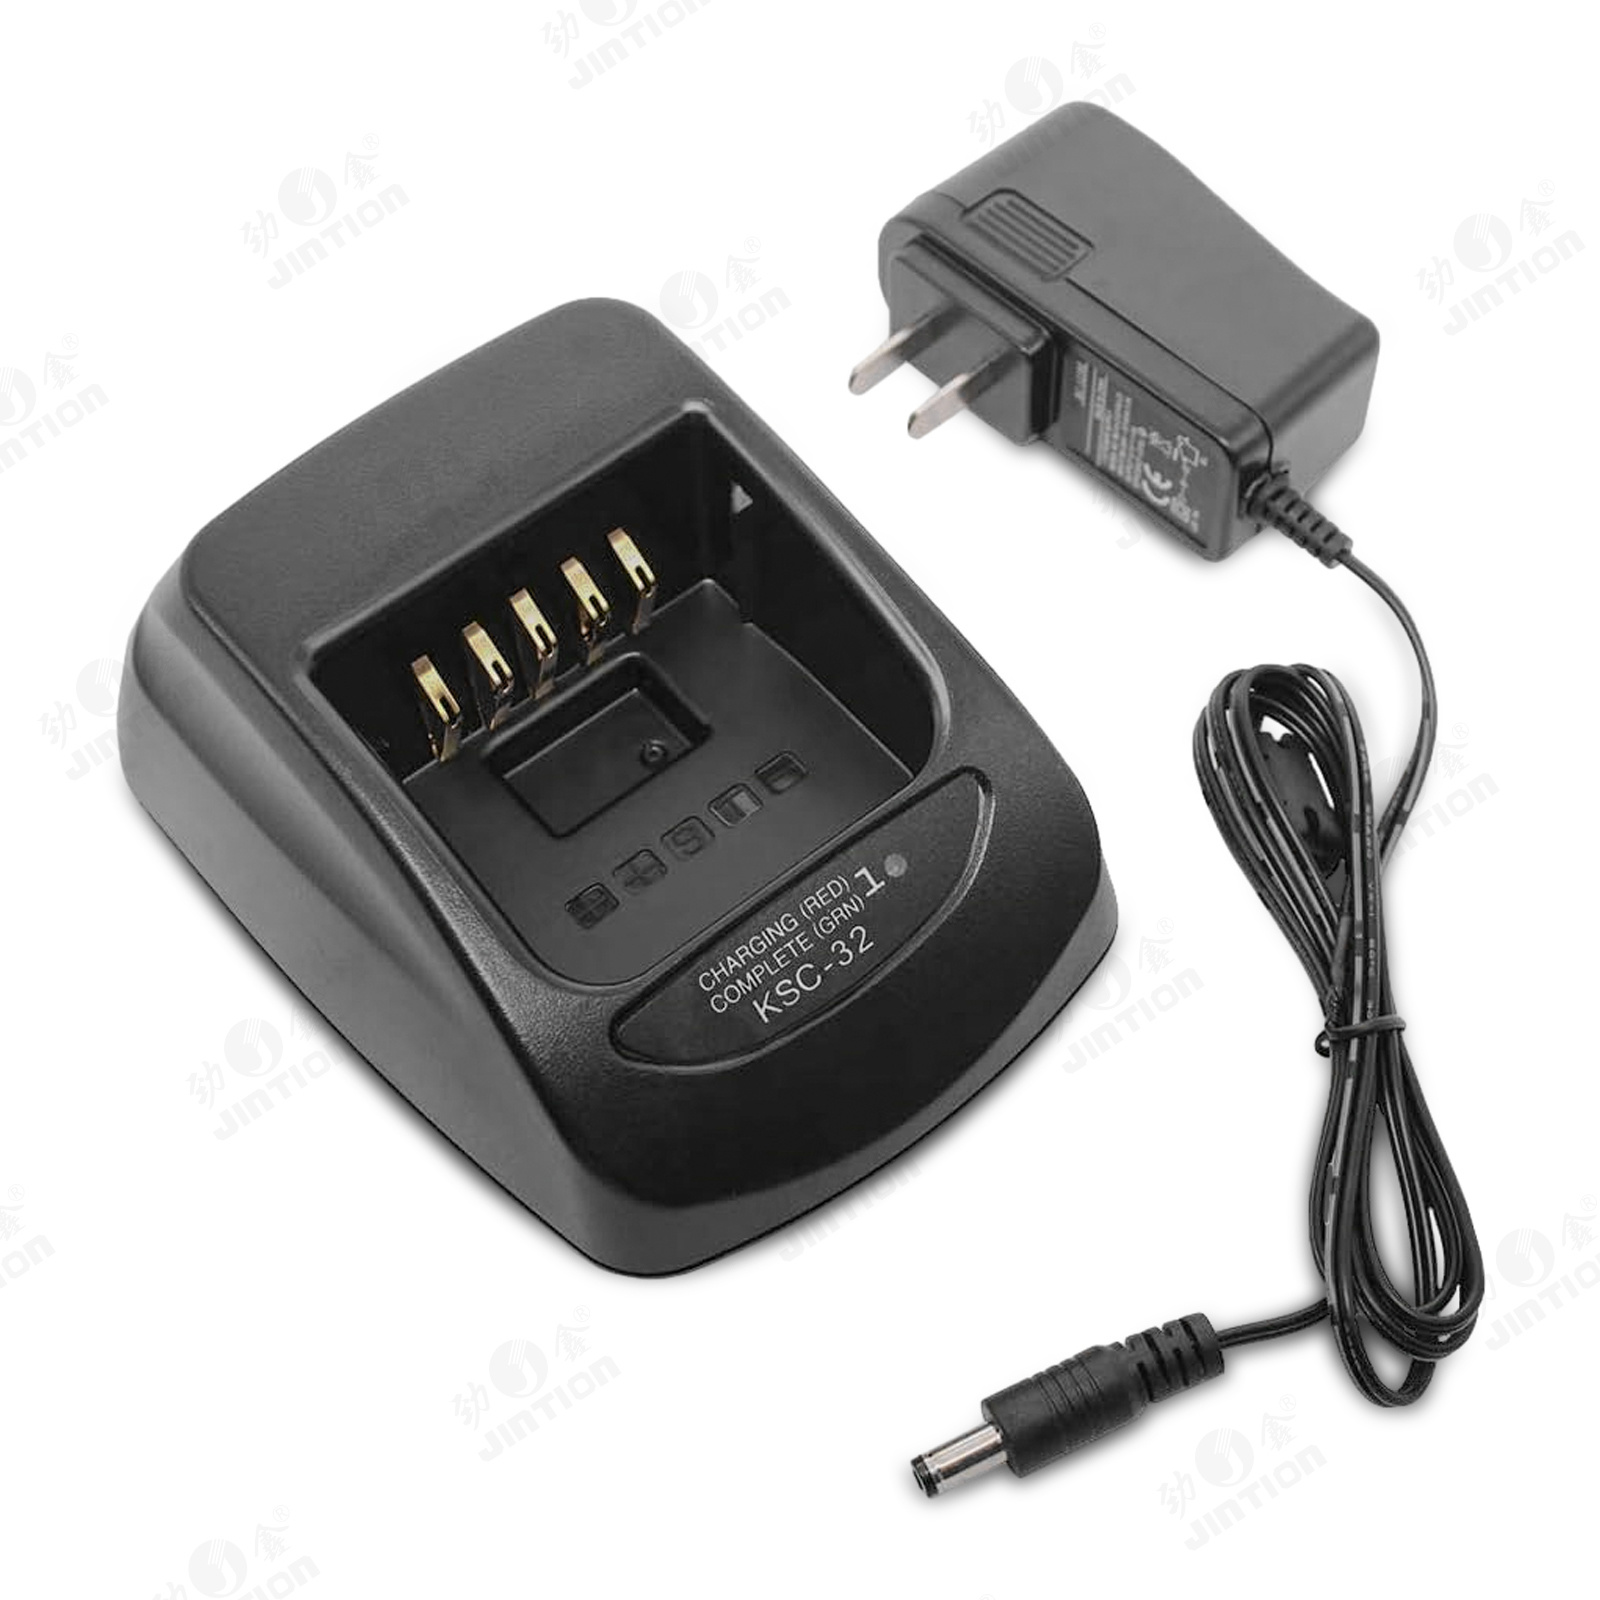 JINTION KSC-32 Charger Two way radio charger Walkie-talkie charger Smart charging stand for Kenwood Radio RHD72A 2180 3180 5210